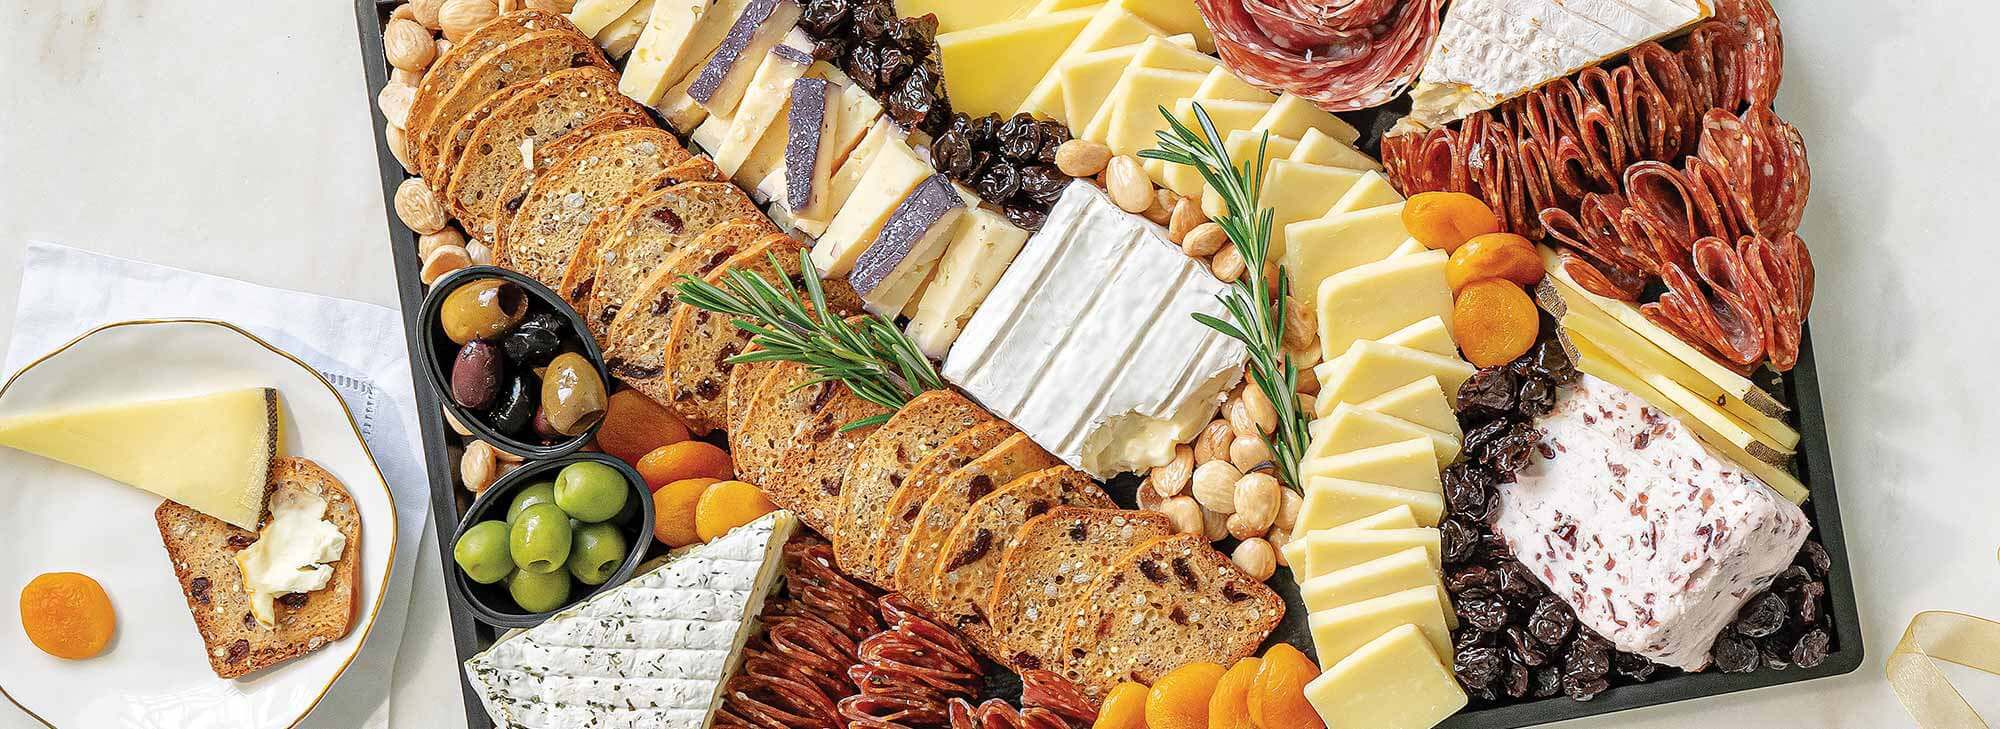 Make your own cheese and charcuterie board